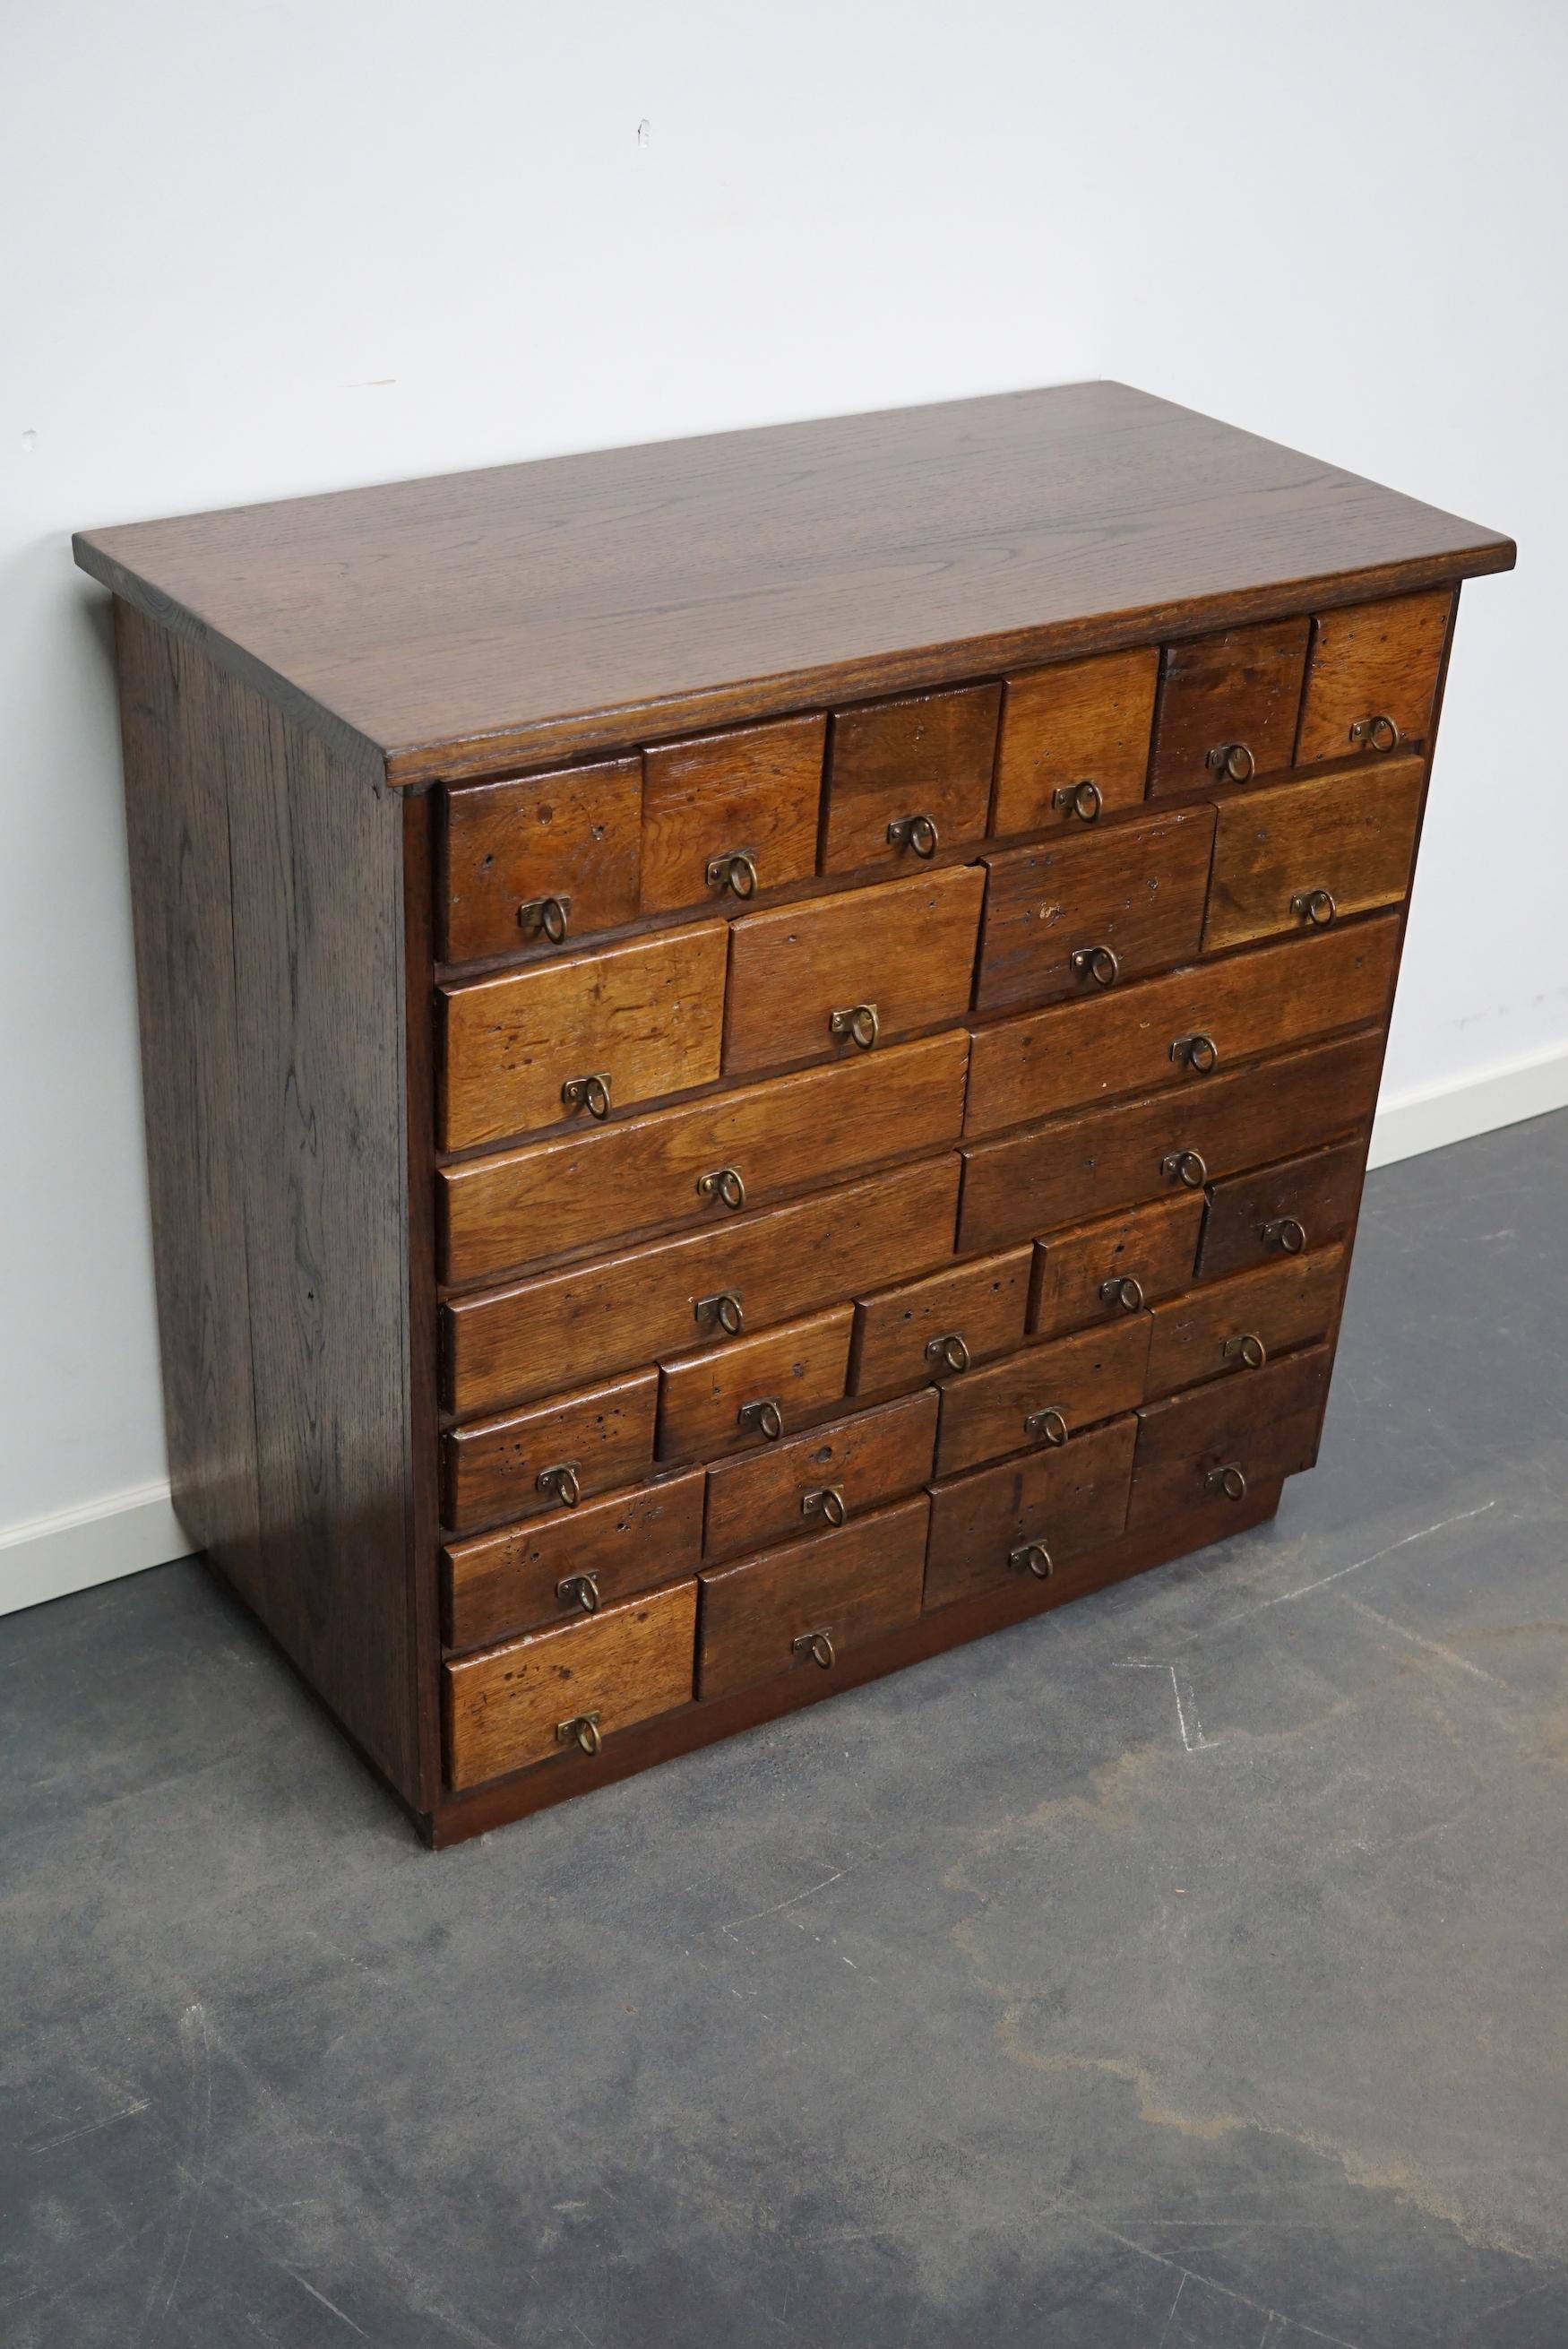 Mid-20th Century German Industrial Oak and Pine Apothecary Cabinet, 1930s